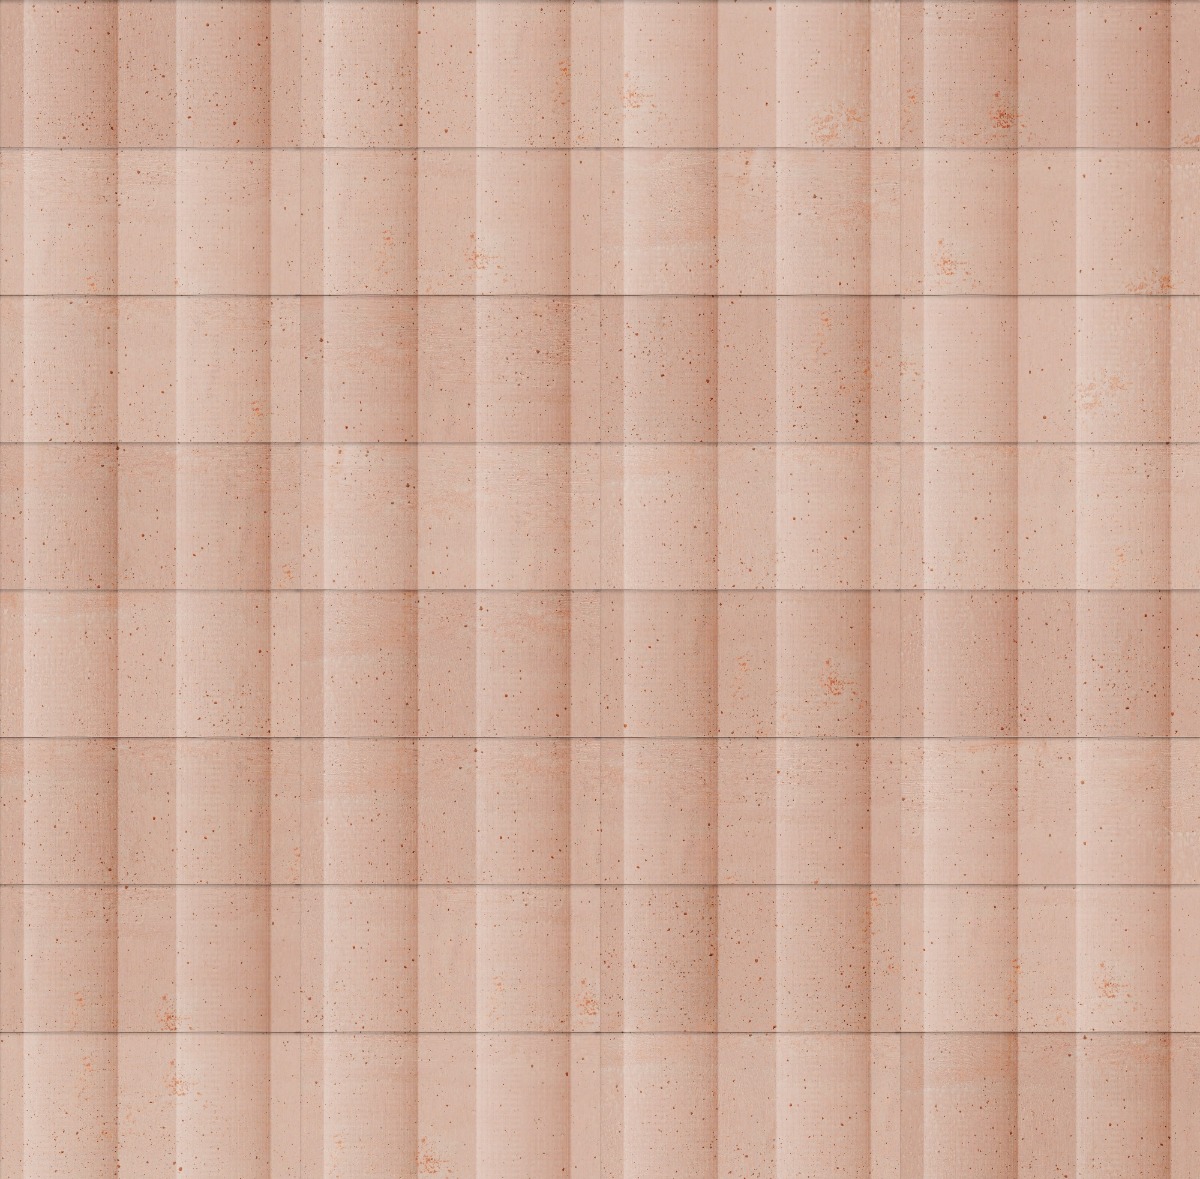 A seamless tile texture with terracotta tiles arranged in a Stack pattern